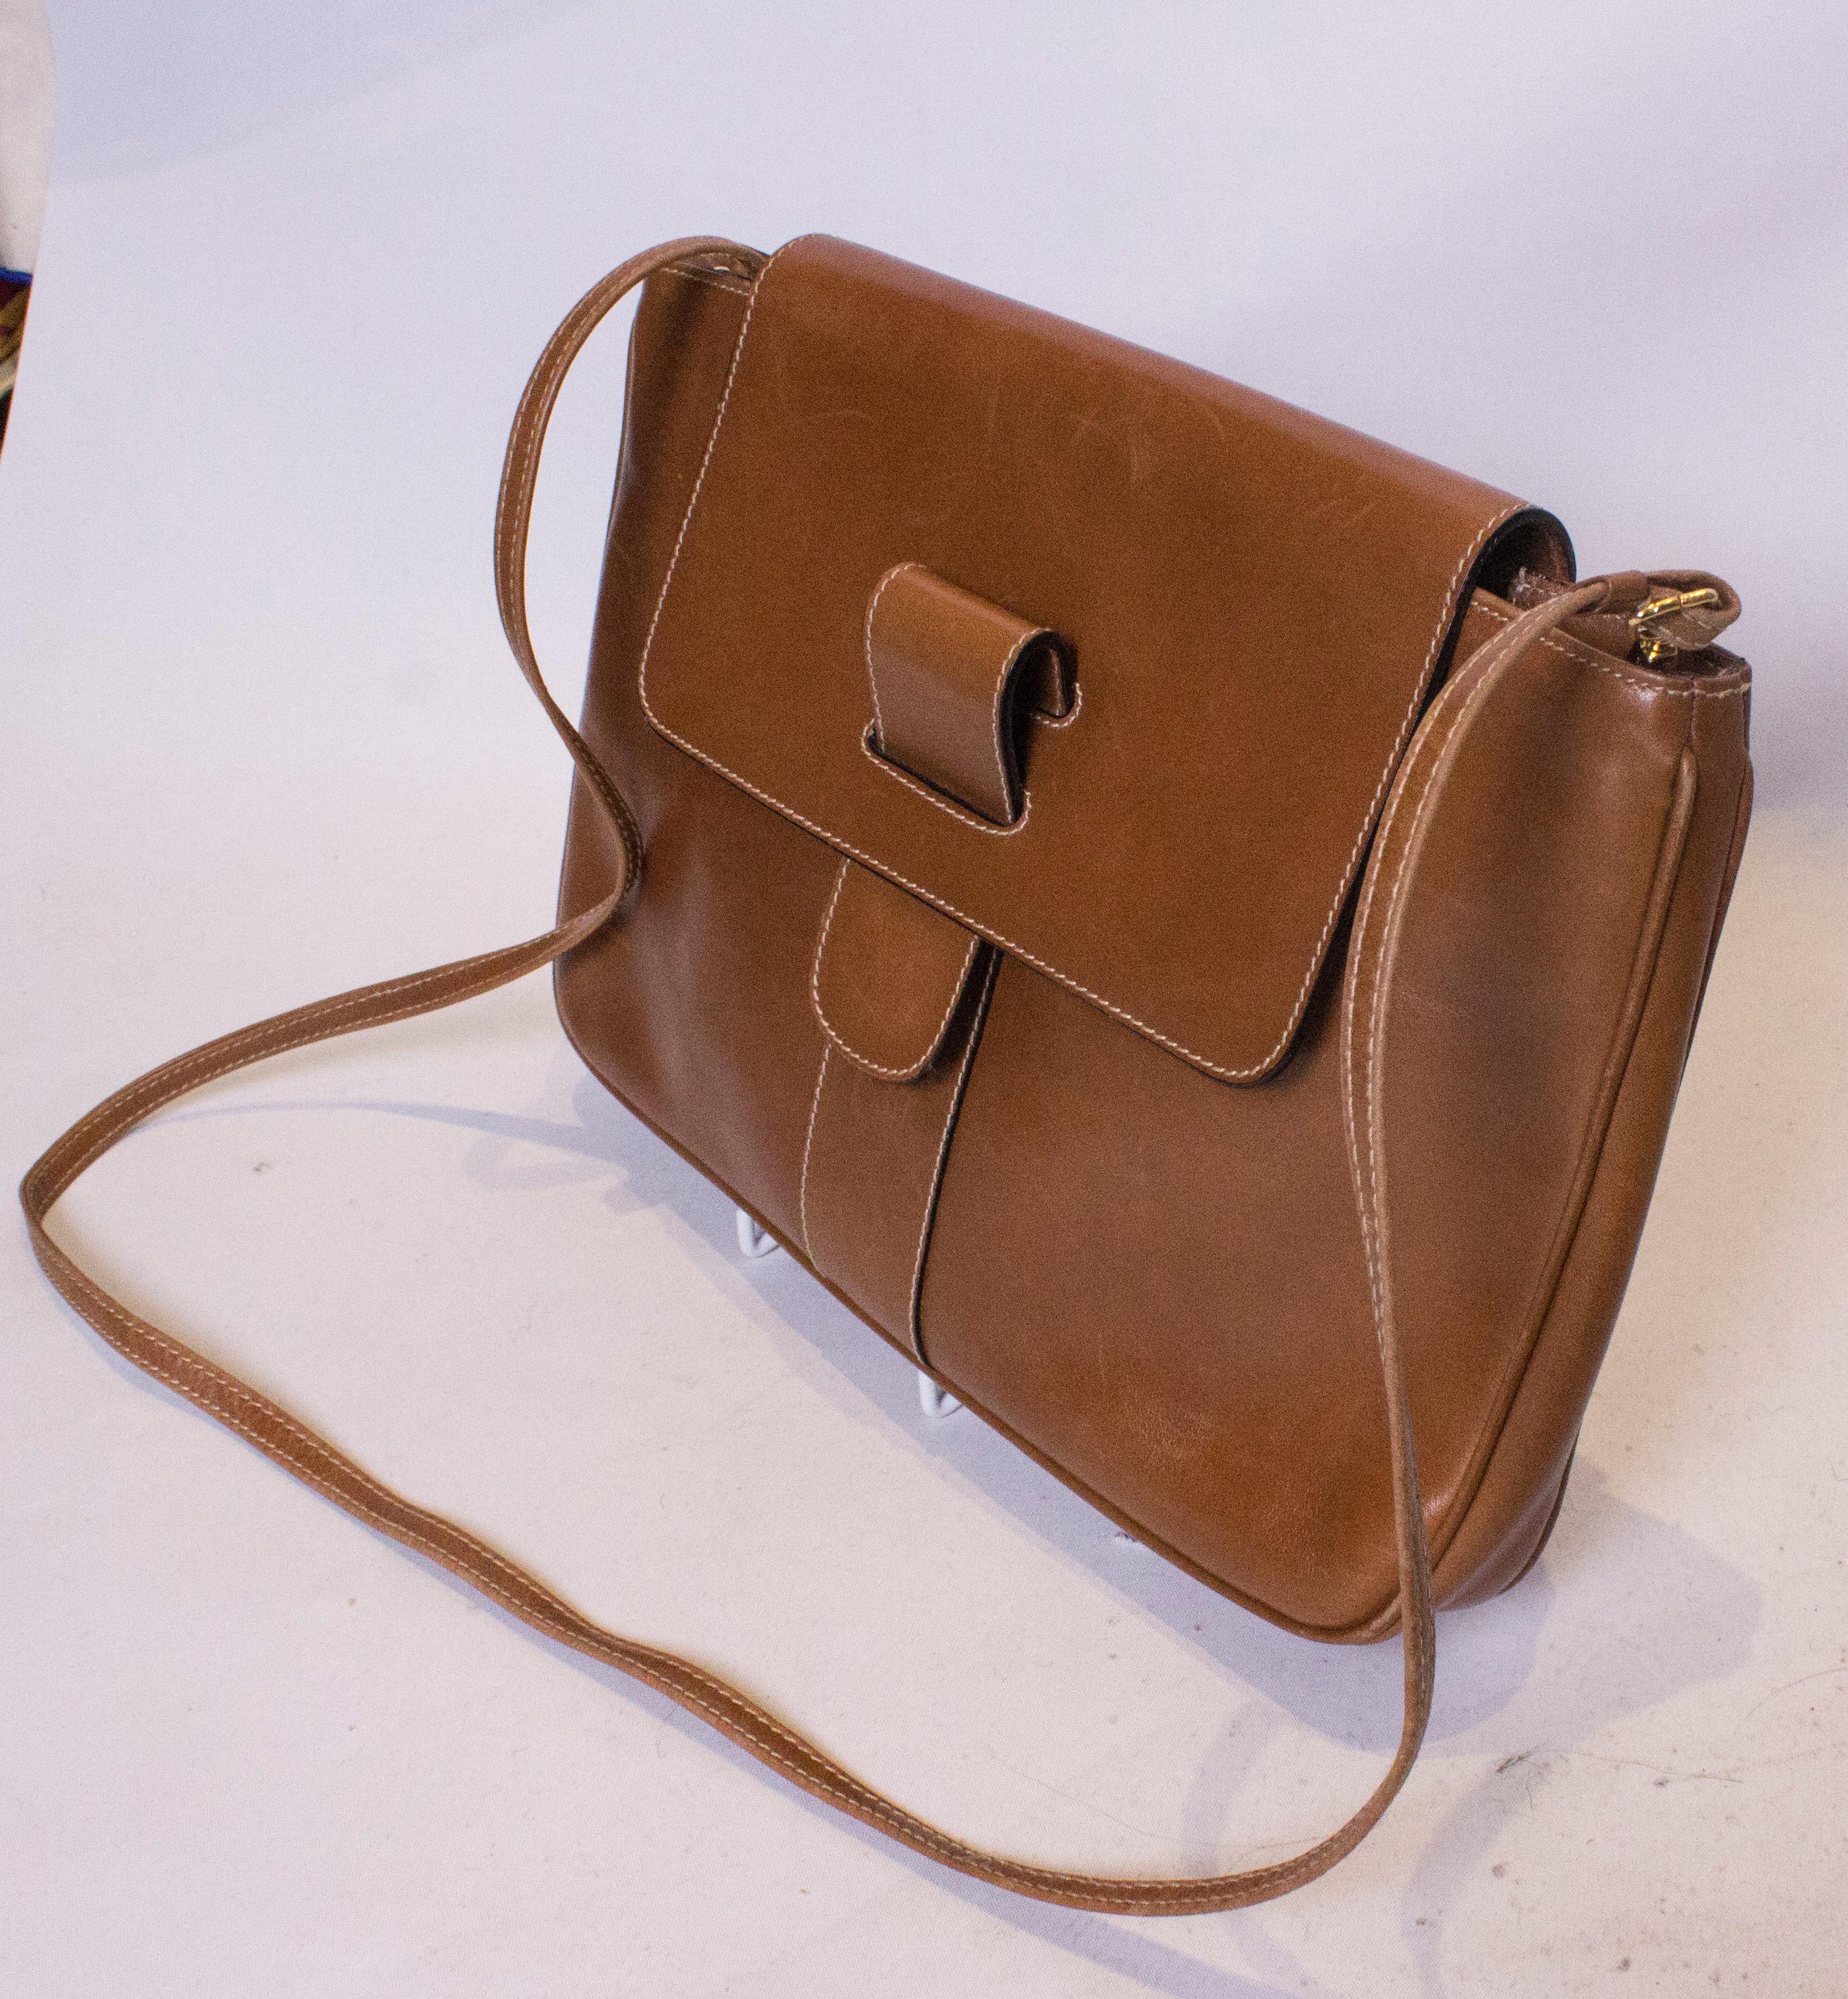 A stylish leather bag by Italian firm Ferragamo.  In a chic tan colour, the bag has a popper fastening at the front, with an internal zip pocket.  The bag has a long strap and so  can be worn cross body or as a clutch. In excellent condition and